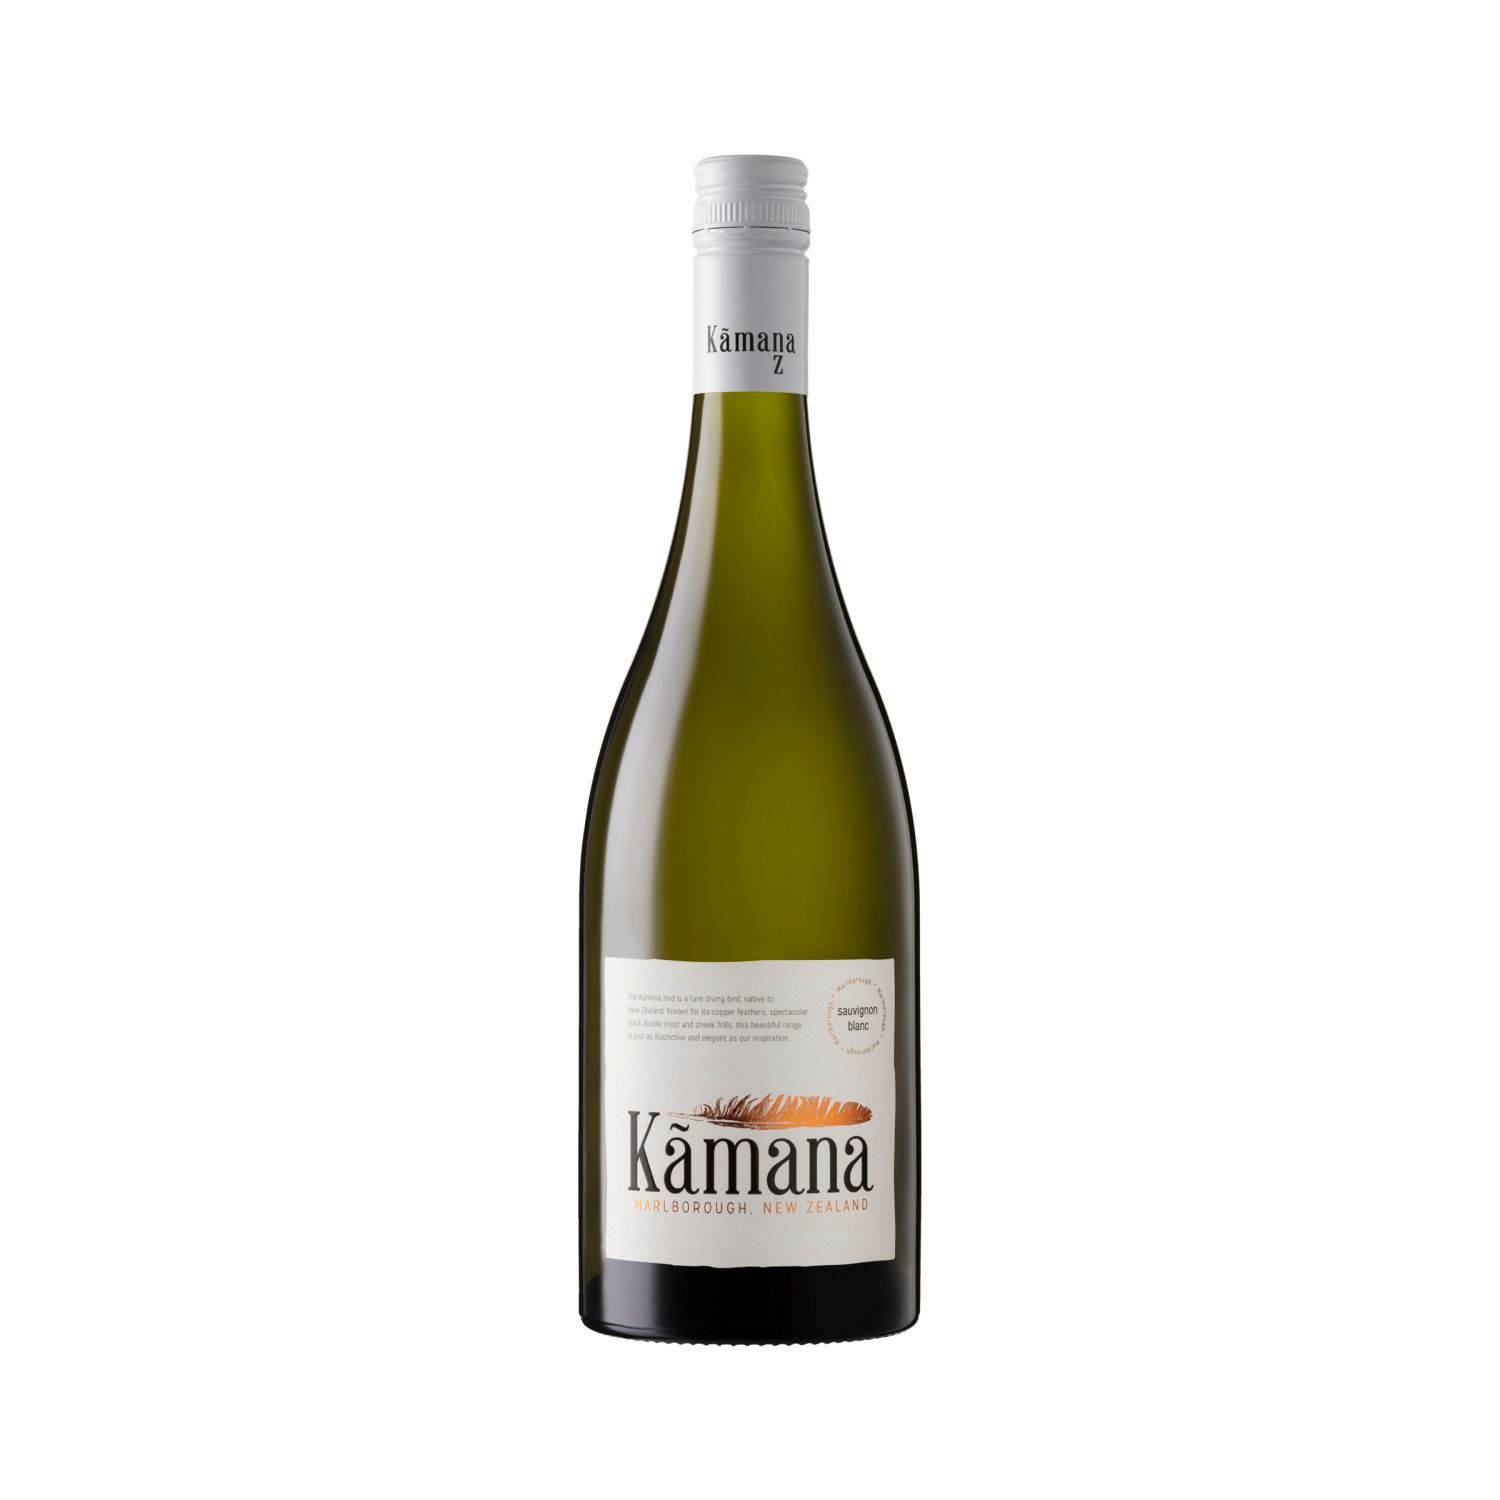 Kamana is a full flavoured wine that pays homage to the striking Kamana bird that hails from the same location. Known as majestic and distinctive, the bird mirrors the characteristics that we set out to achieve in crafting this wine. Bursting with notes of ripe passionfruit with a peachy sweetness on the palate. Pair with seafood.<br /> <br />Alcohol Volume: 12.50%<br /><br />Pack Format: Bottle<br /><br />Standard Drinks: 7.1</br /><br />Pack Type: Bottle<br /><br />Country of Origin: New Zealand<br /><br />Region: Marlborough<br /><br />Vintage: Vintages Vary<br />